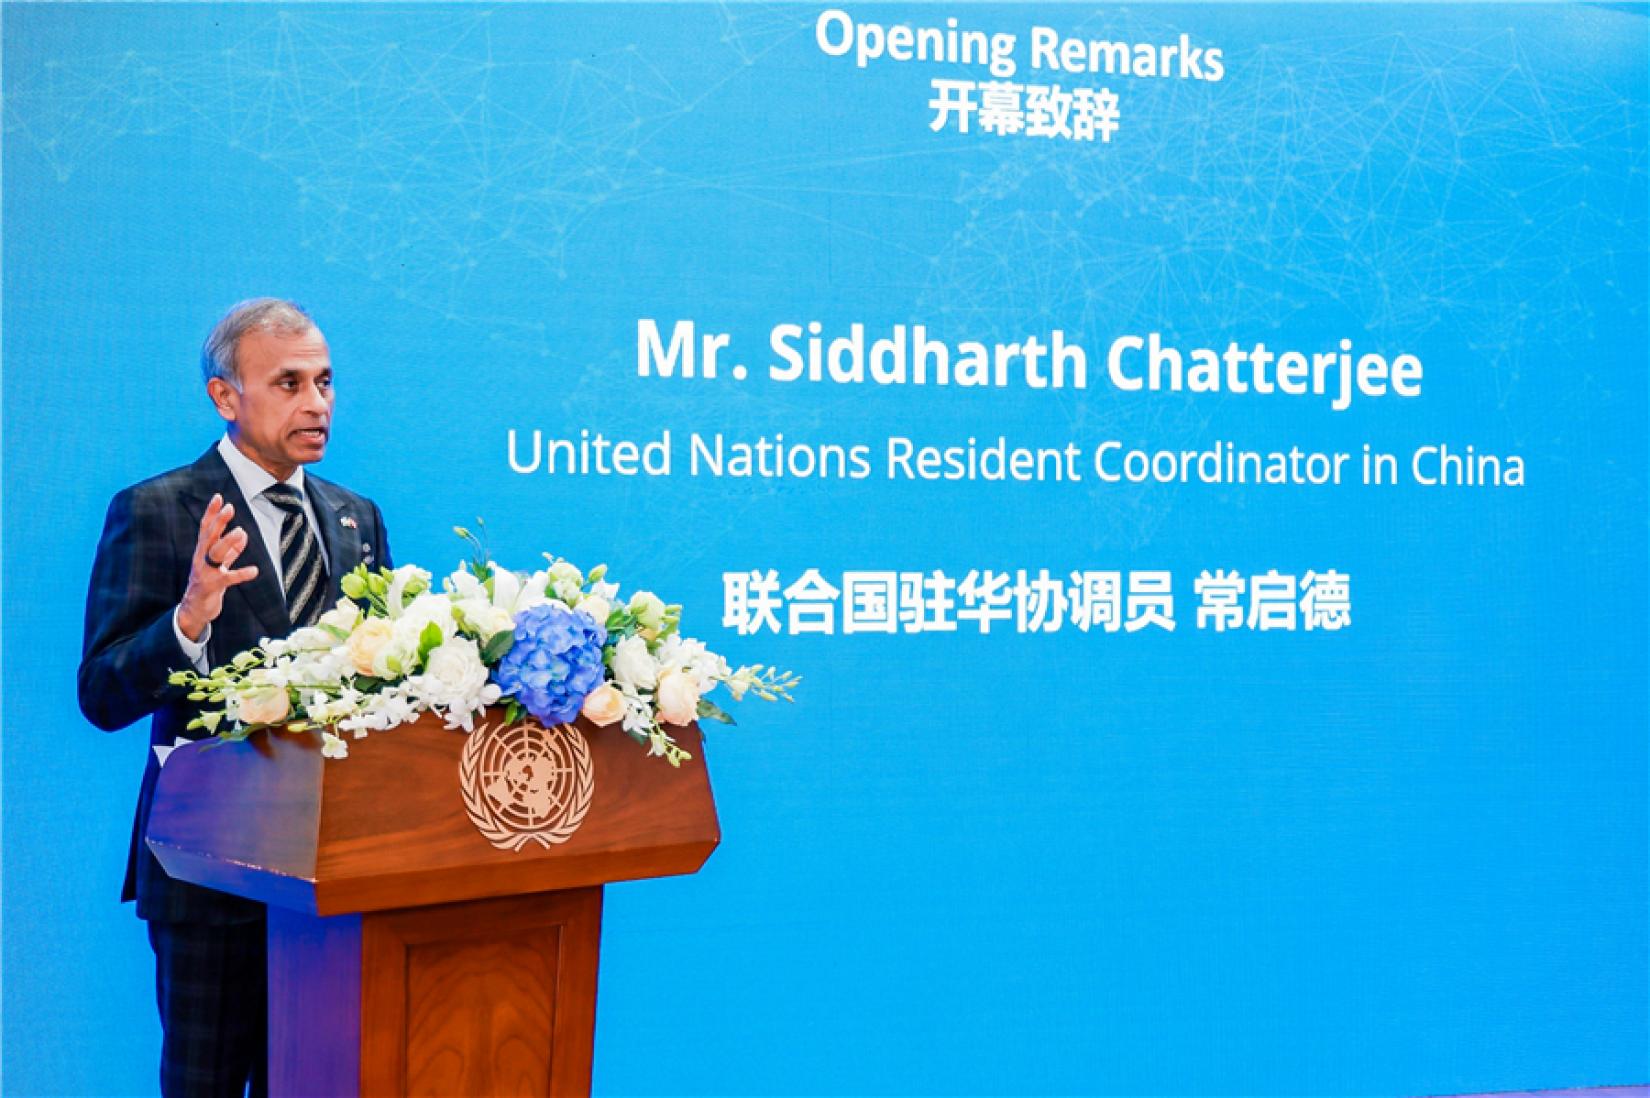 Siddharth Chatterjee, UN Resident Coordinator in China delivers a speech at the South-South Cooperation Knowledge Sharing Forum